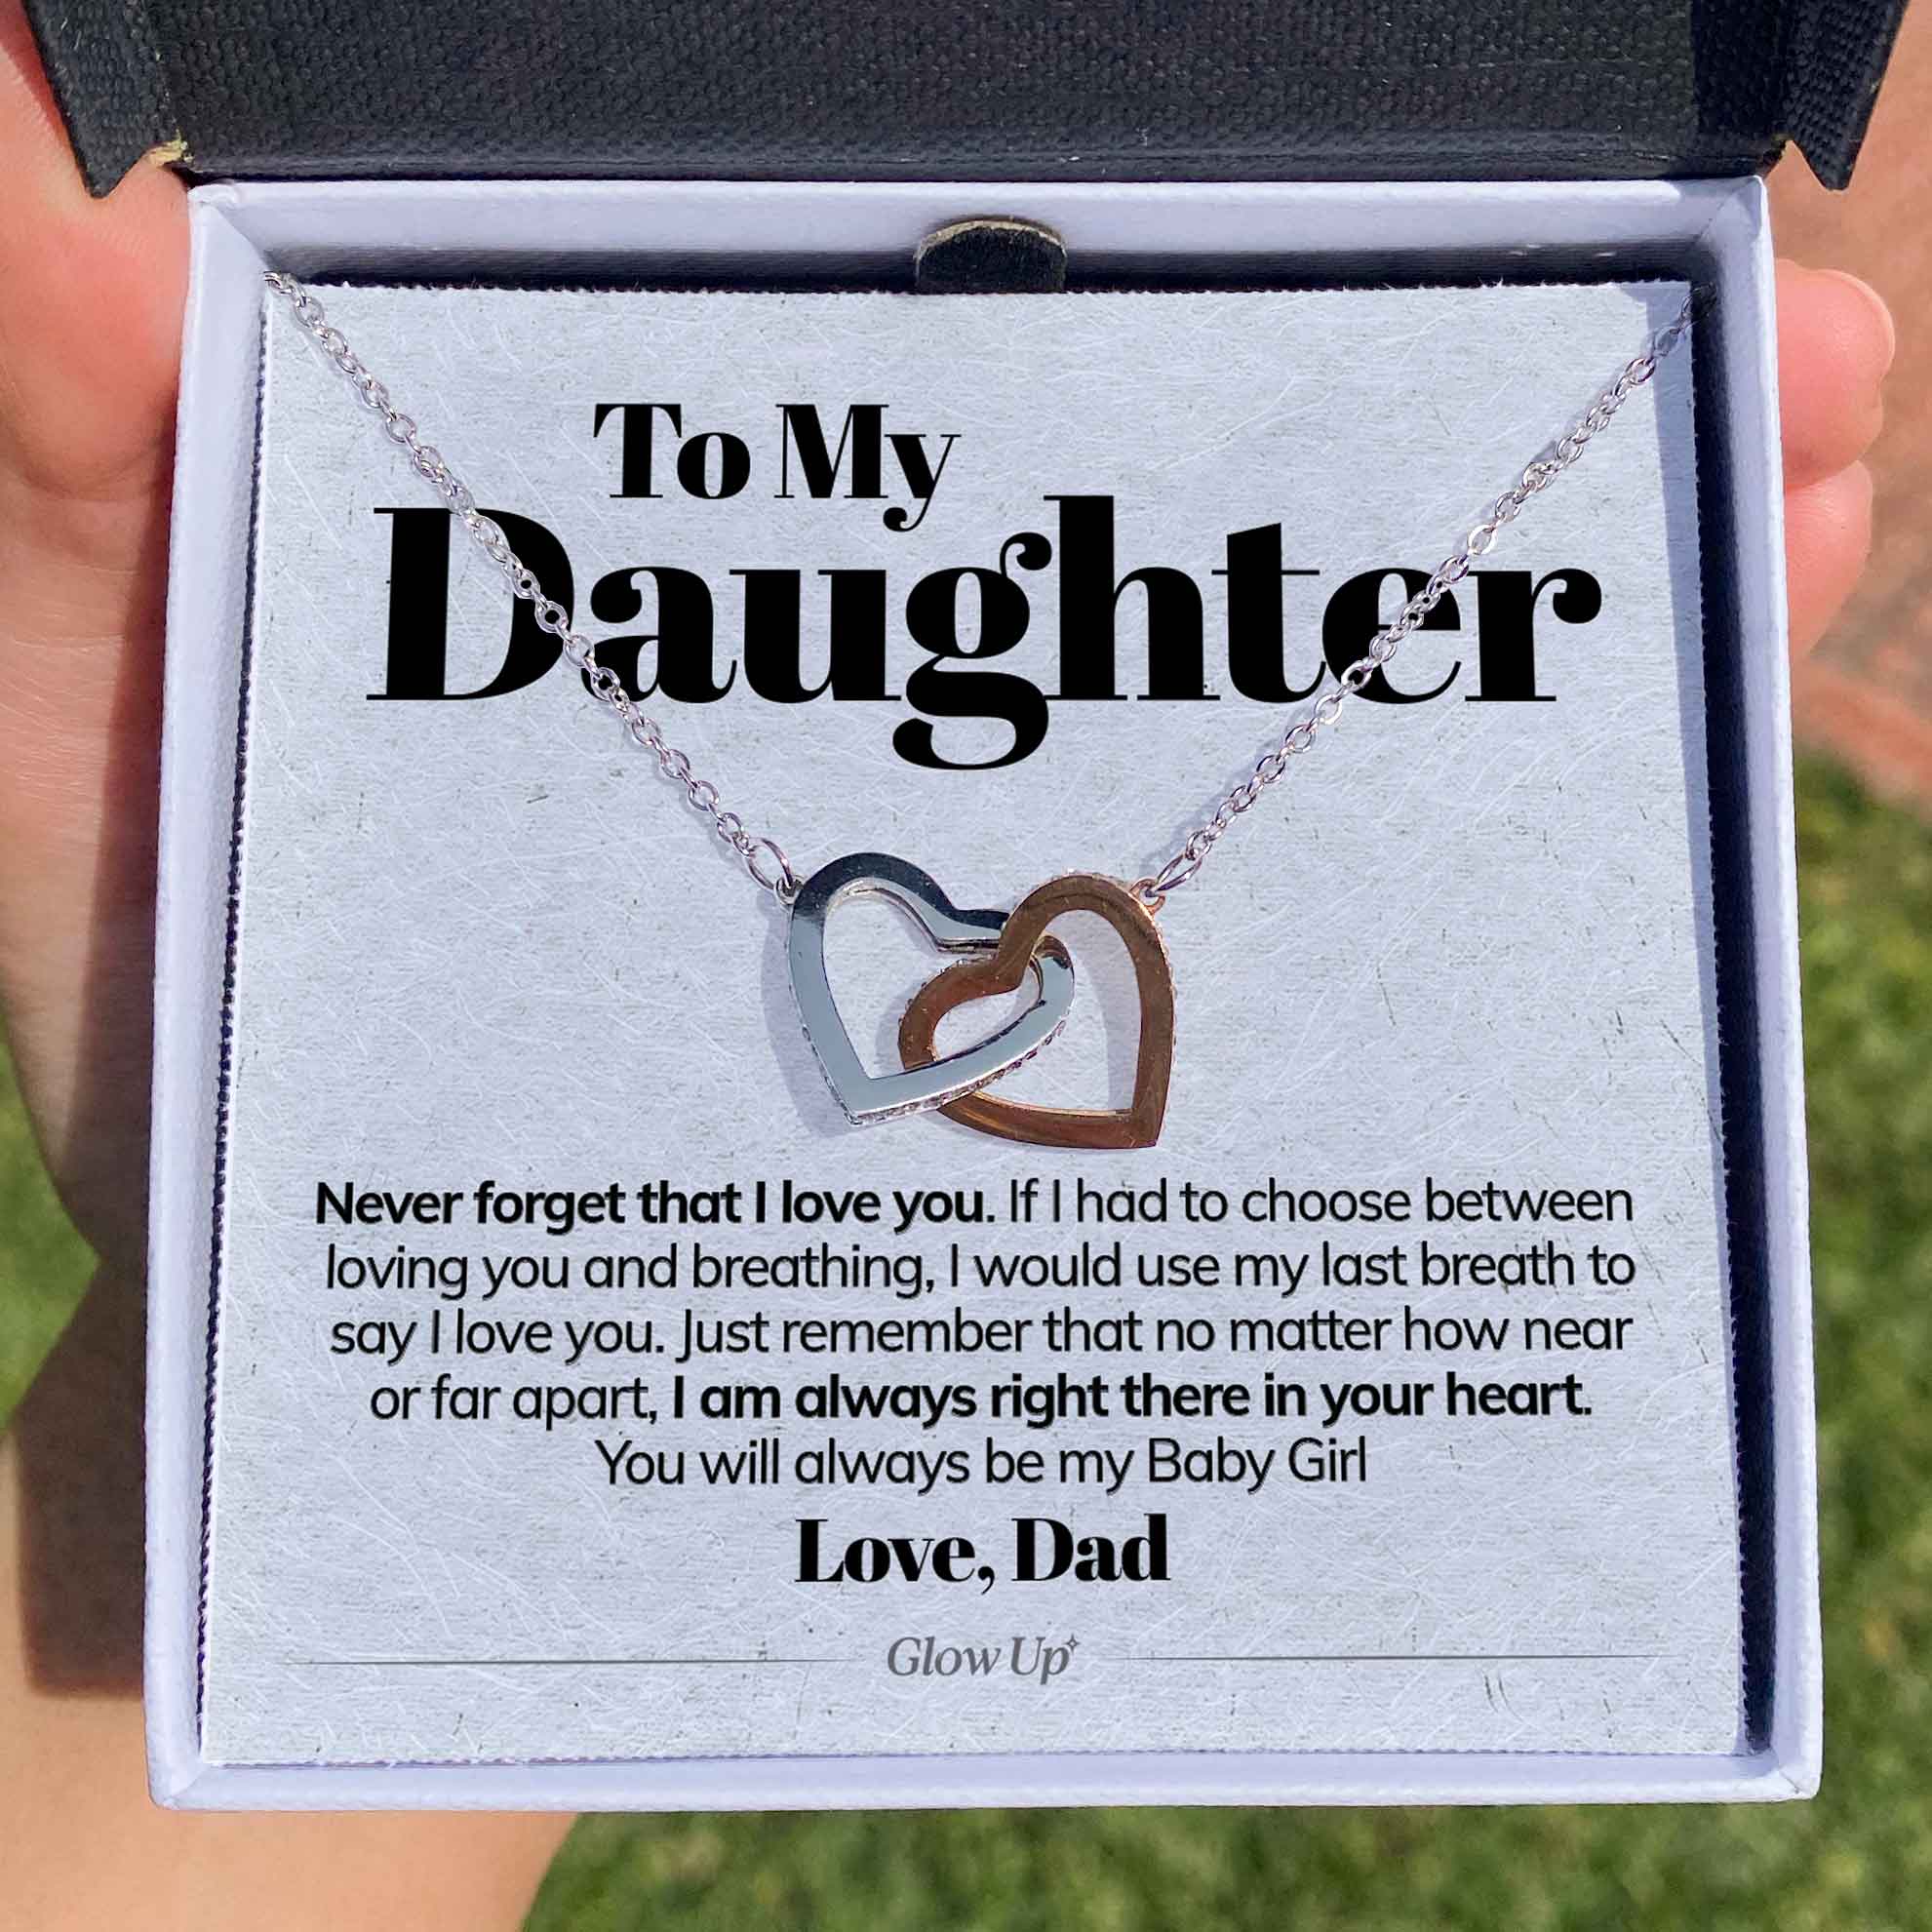 ShineOn Fulfillment Jewelry Standard Box To My Daughter - Never Forget That I Love You - Interlocking Hearts Necklace